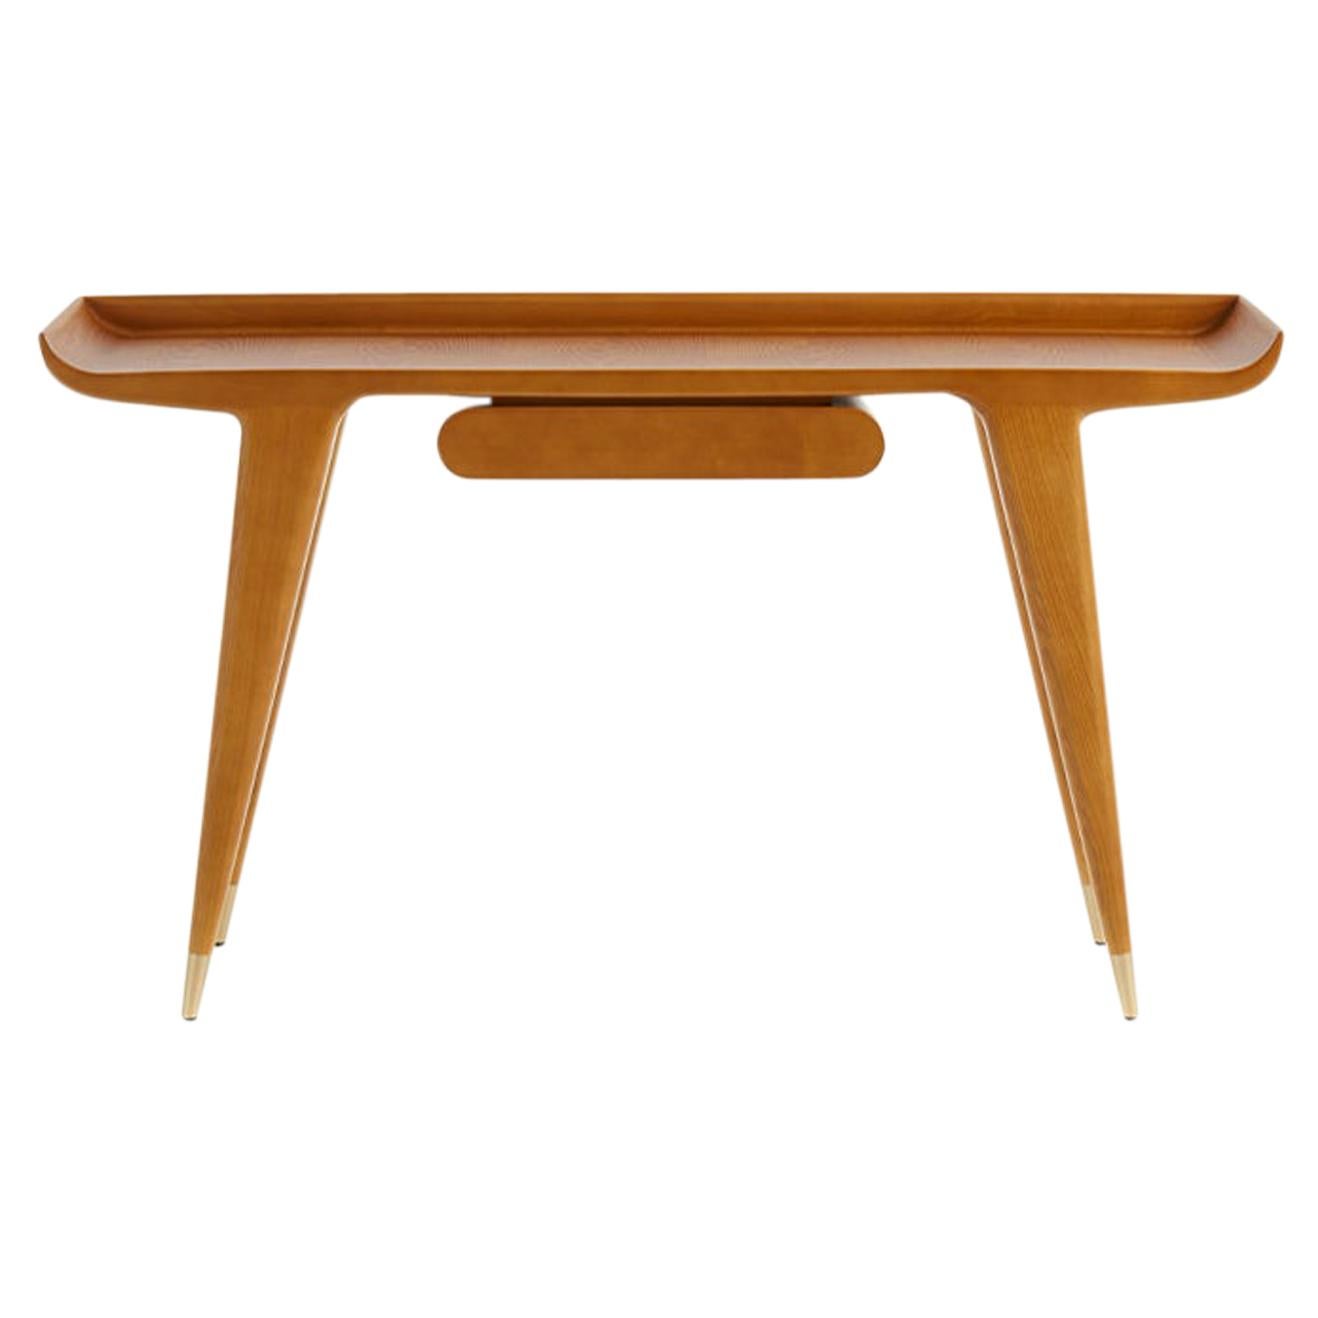 Writing Desk in Solid Ash Wood Molteni&C by Gio Ponti D.847.1 - made in Italy